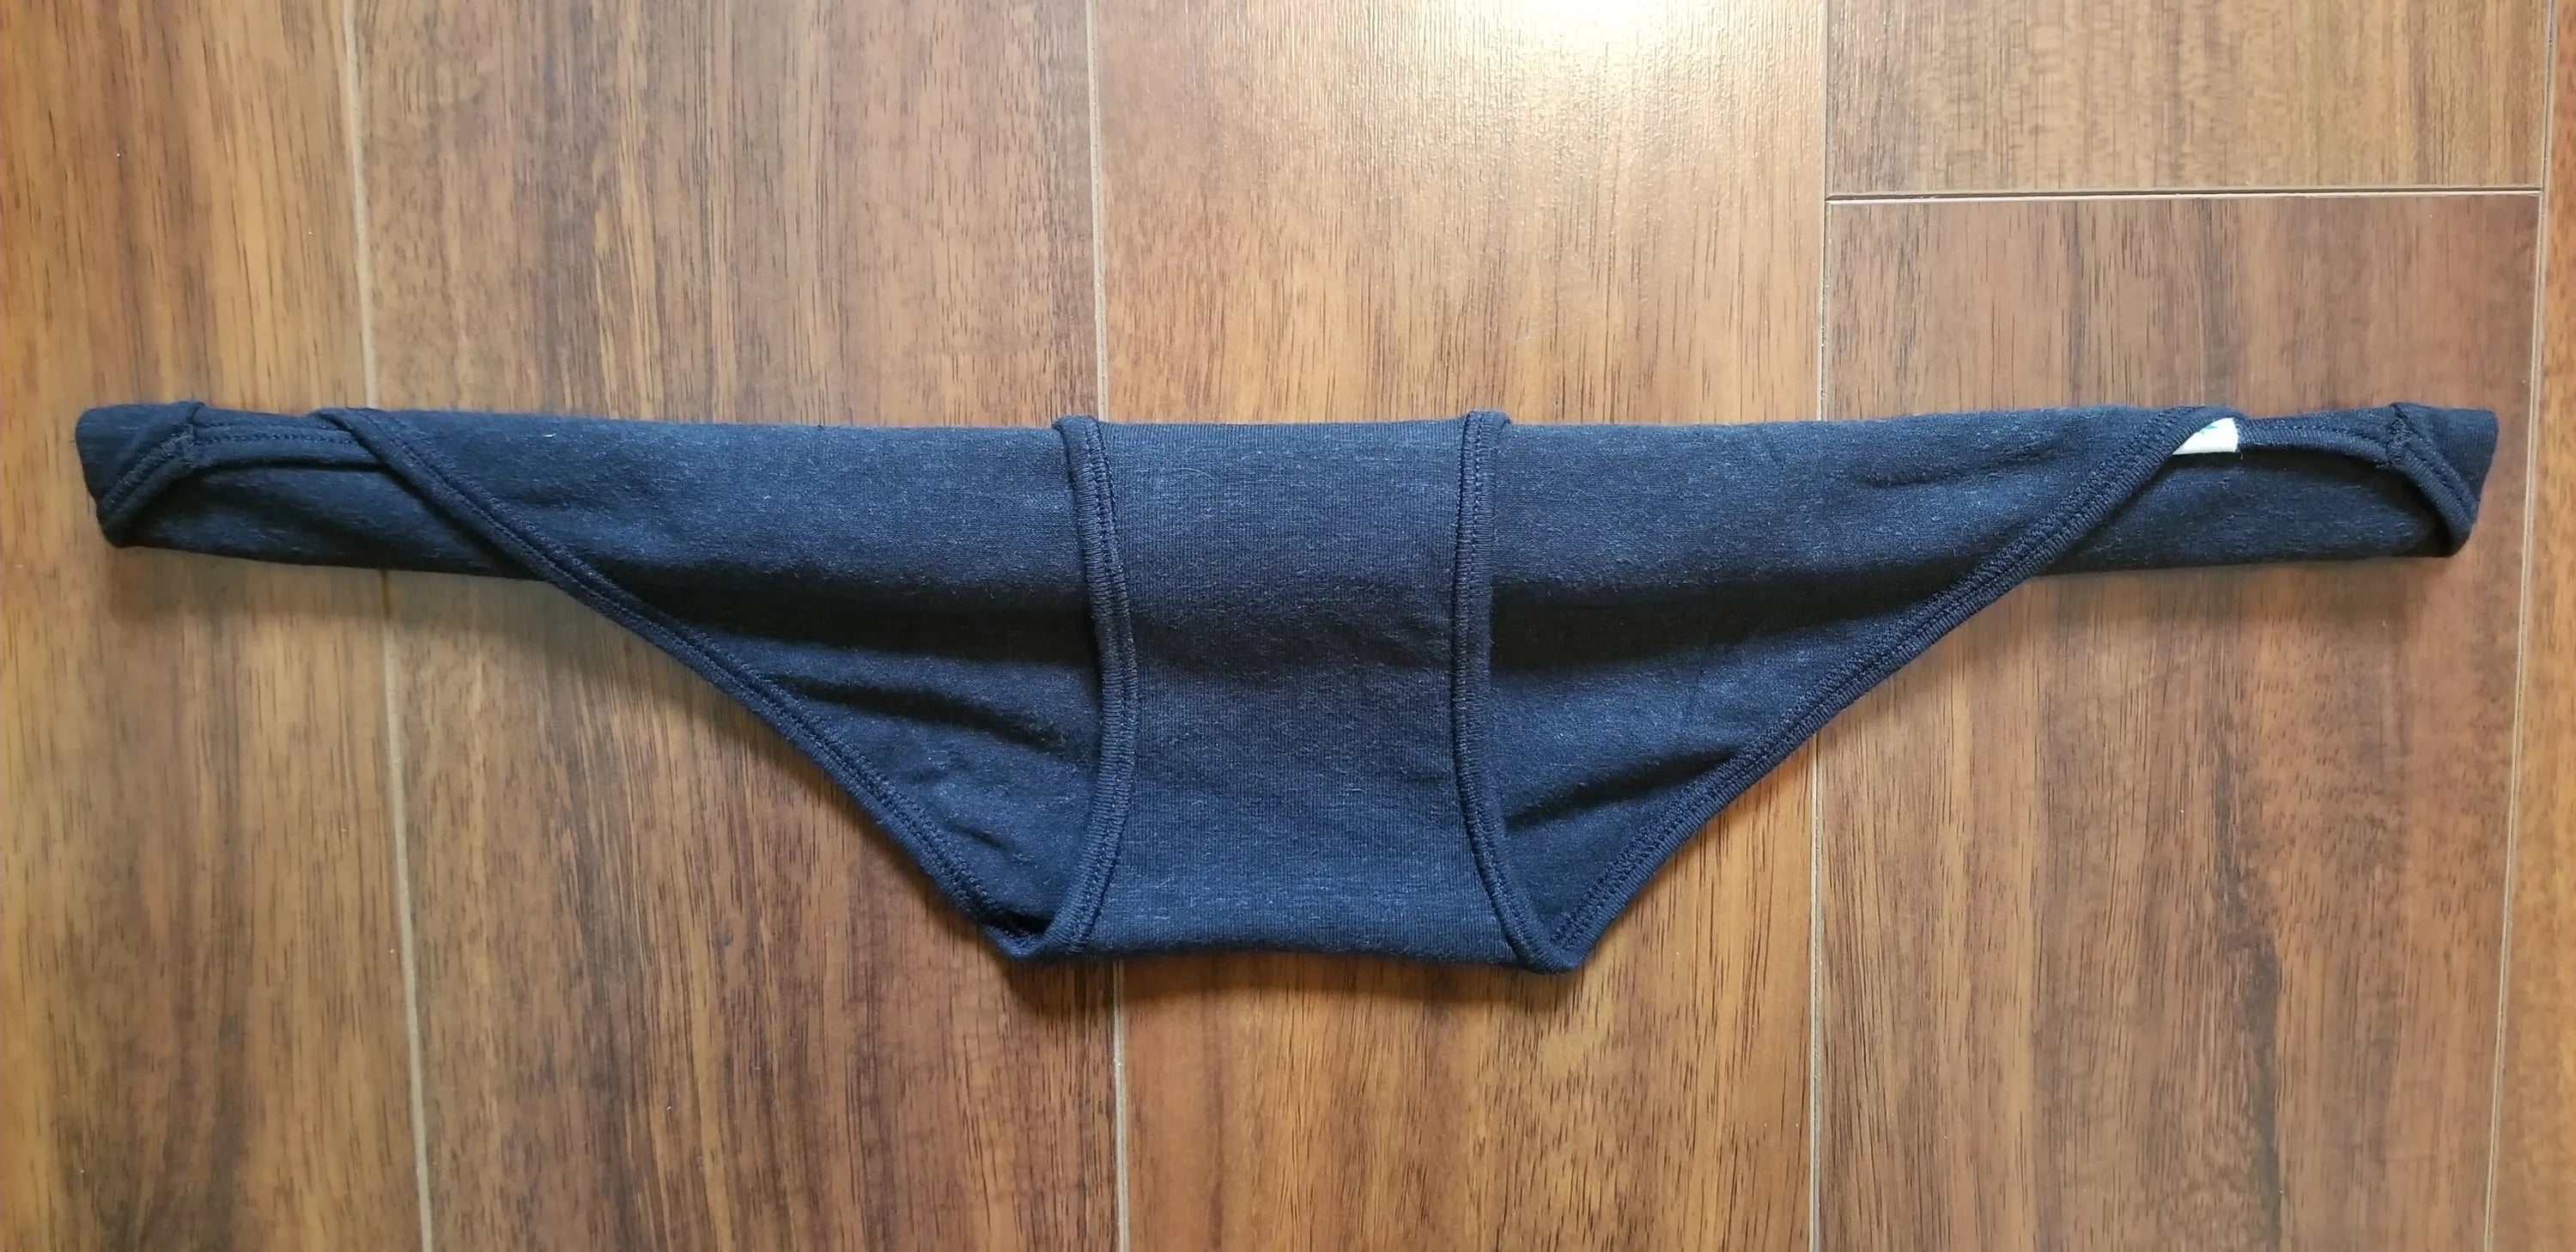 HOW TO RANGER ROLL UNDERWEAR 1: LAY UNDERWEAR 2: FOLD of your FLAT